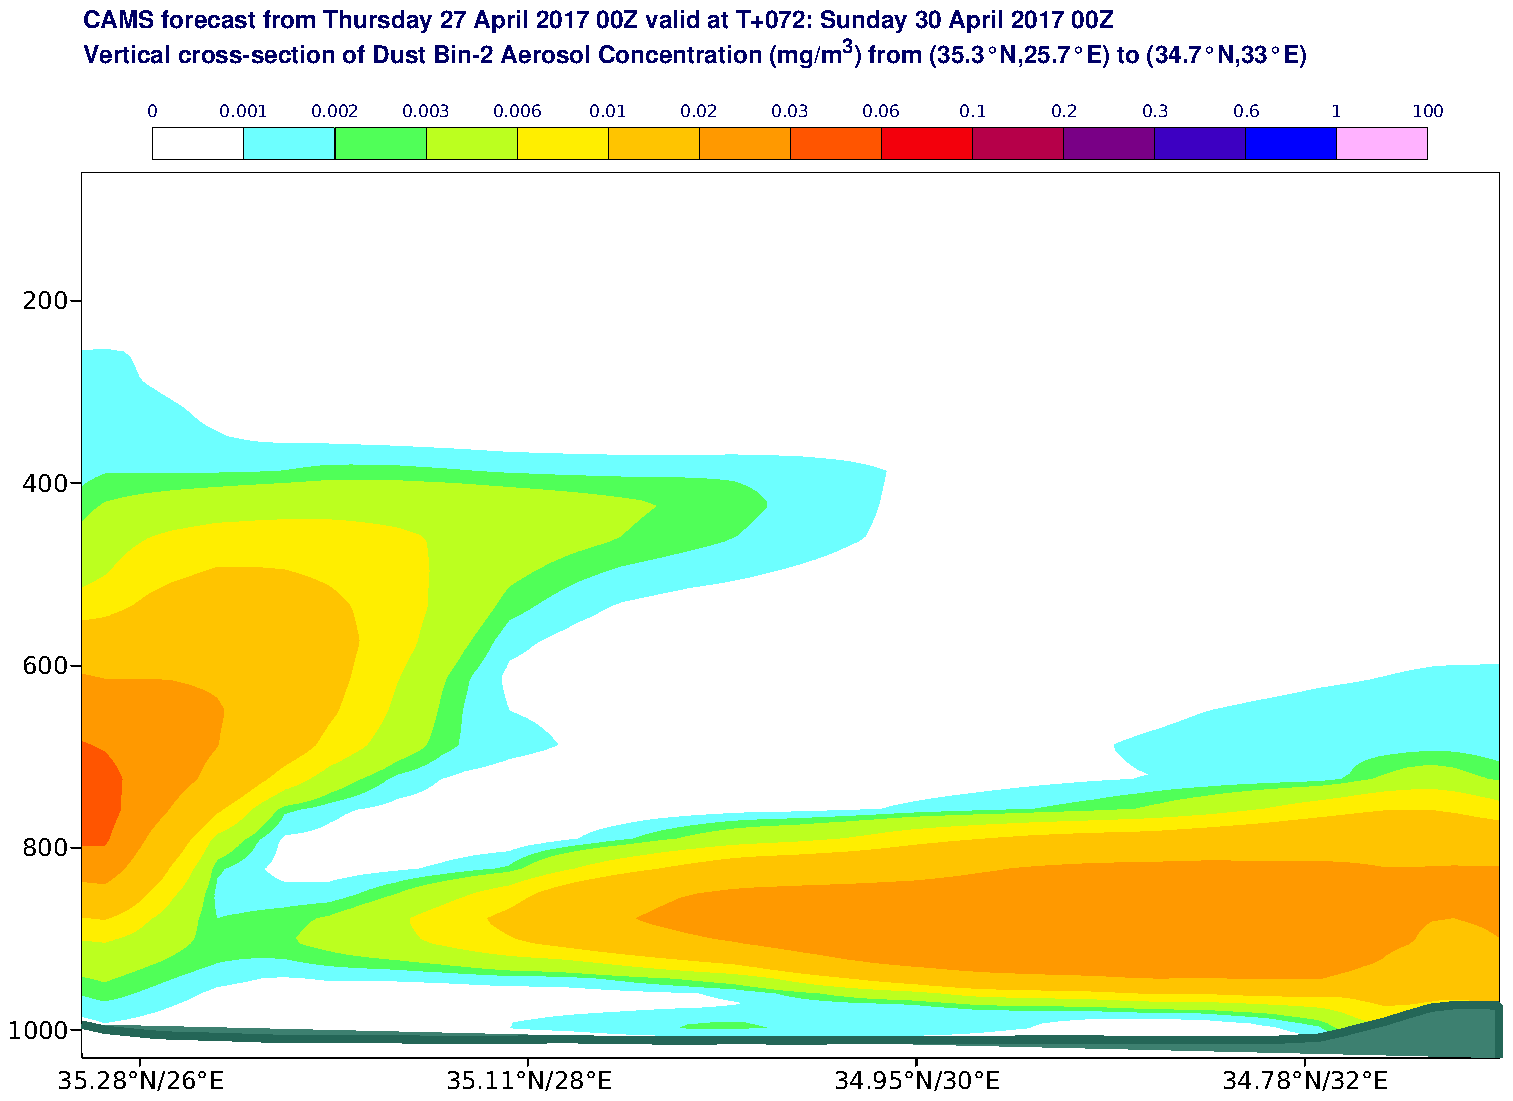 Vertical cross-section of Dust Bin-2 Aerosol Concentration (mg/m3) valid at T72 - 2017-04-30 00:00